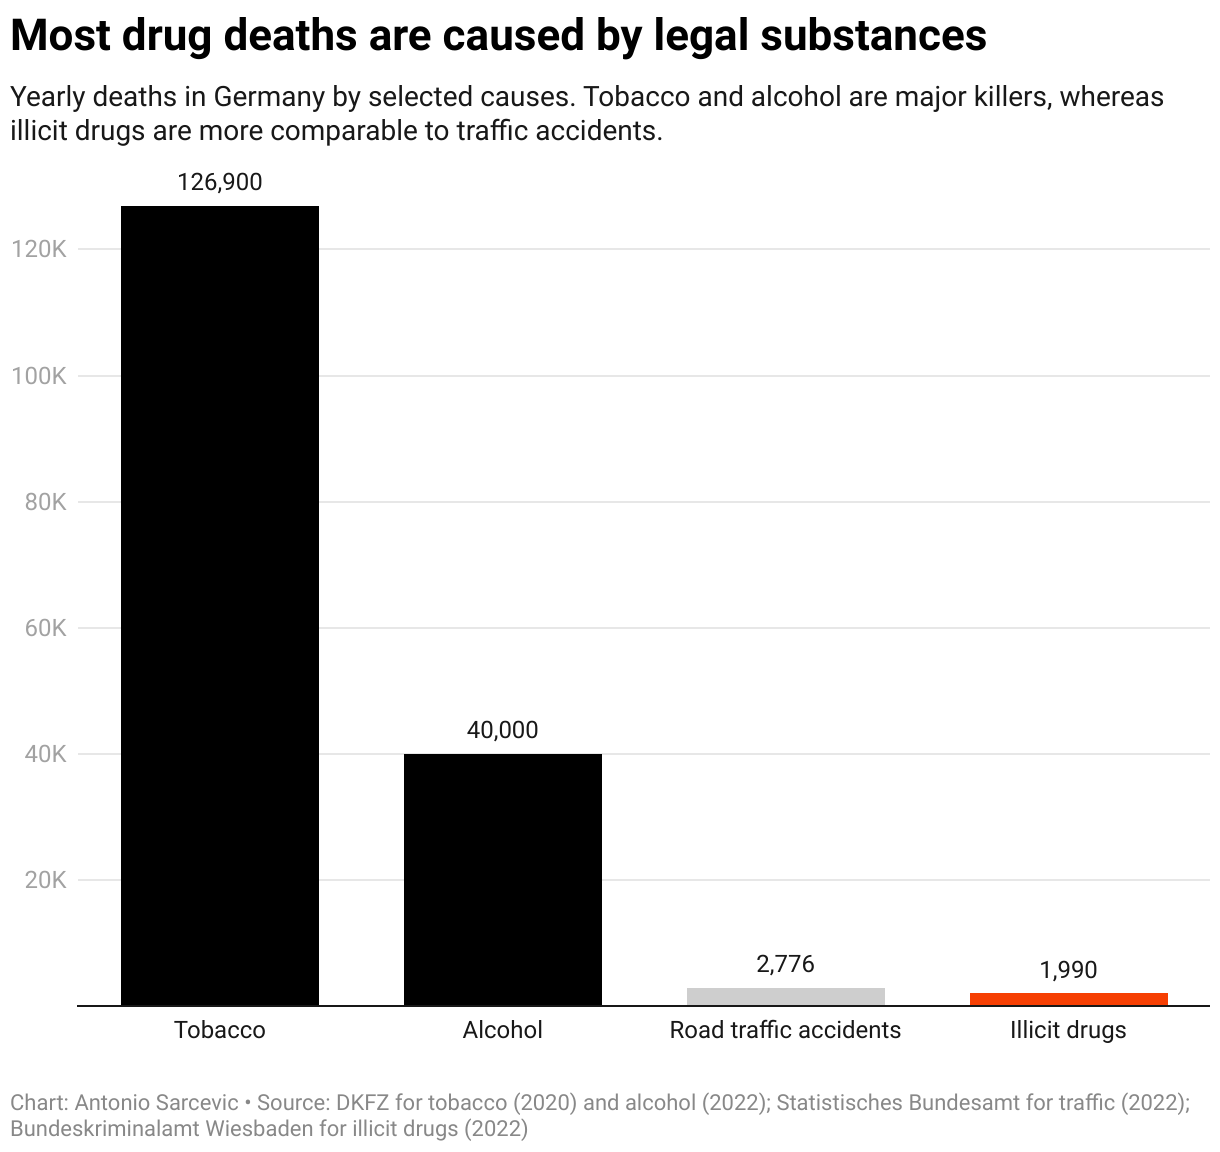 Most drug deaths are caused by legal substances